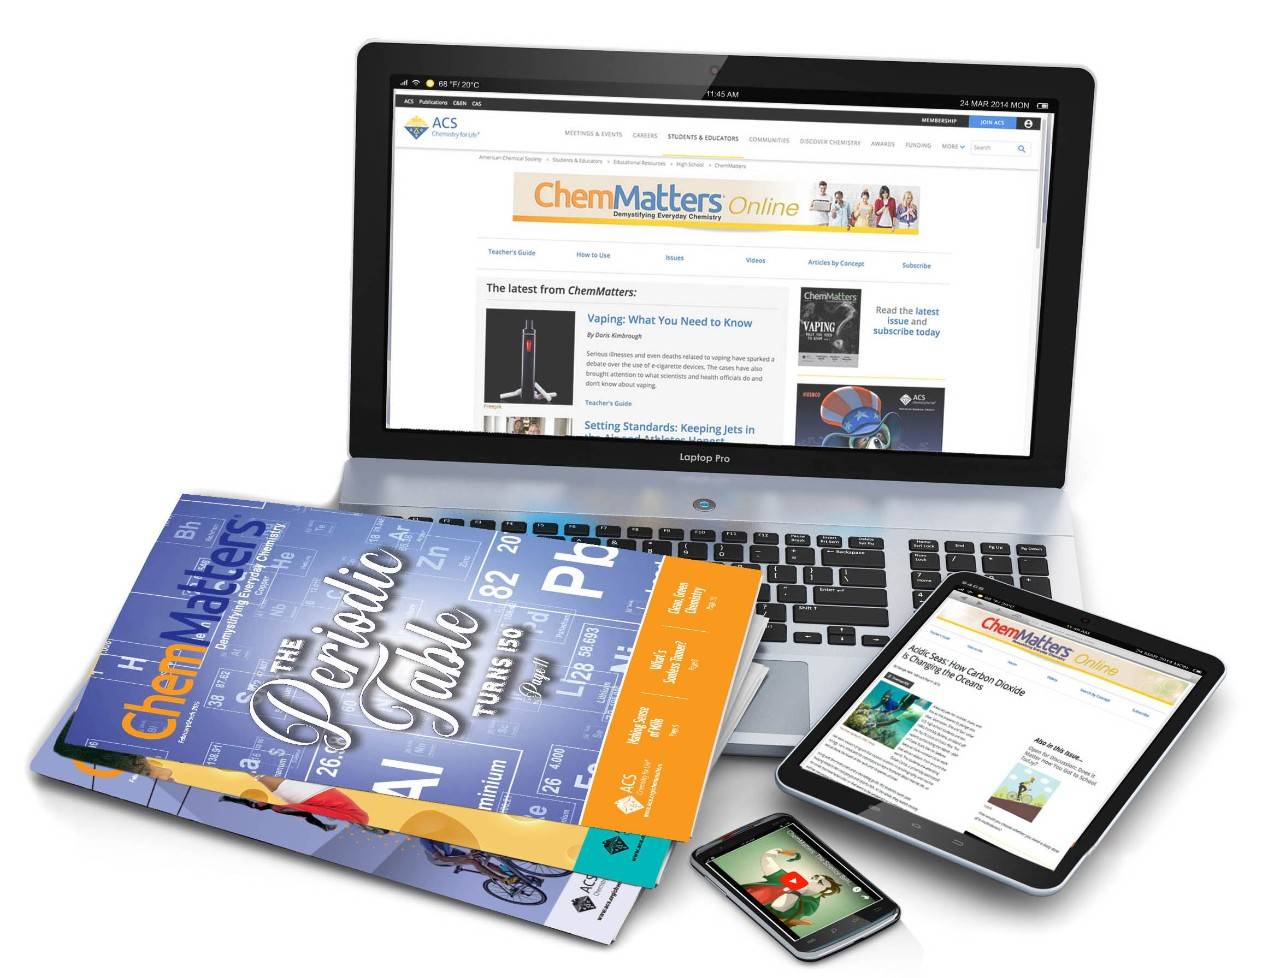 chemmatters in print, online and cell